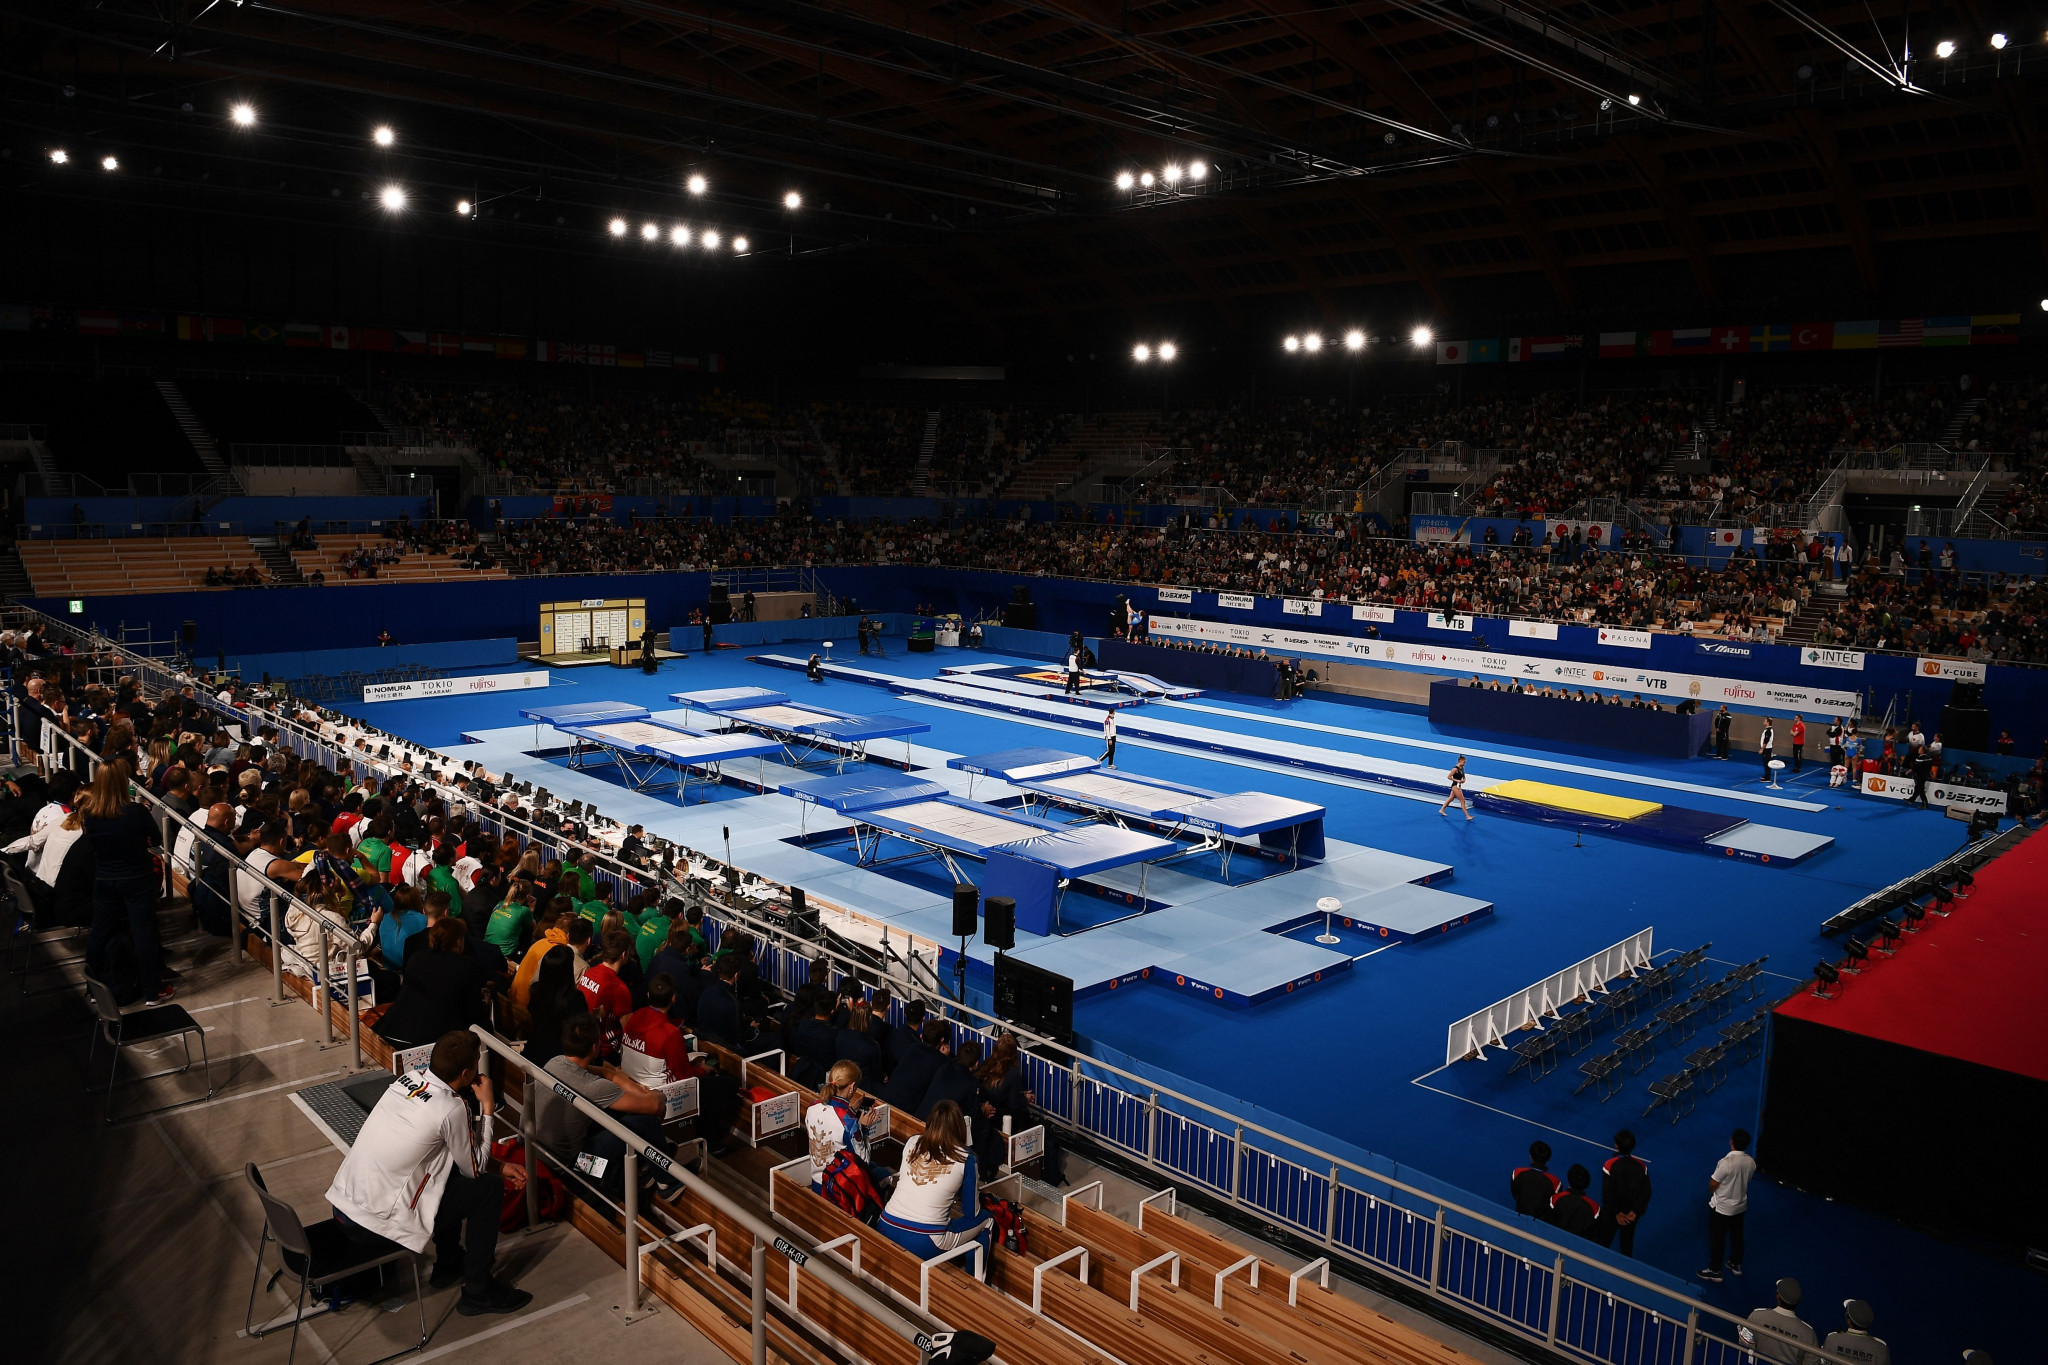 FIG publishes revised qualification system for Tokyo 2020